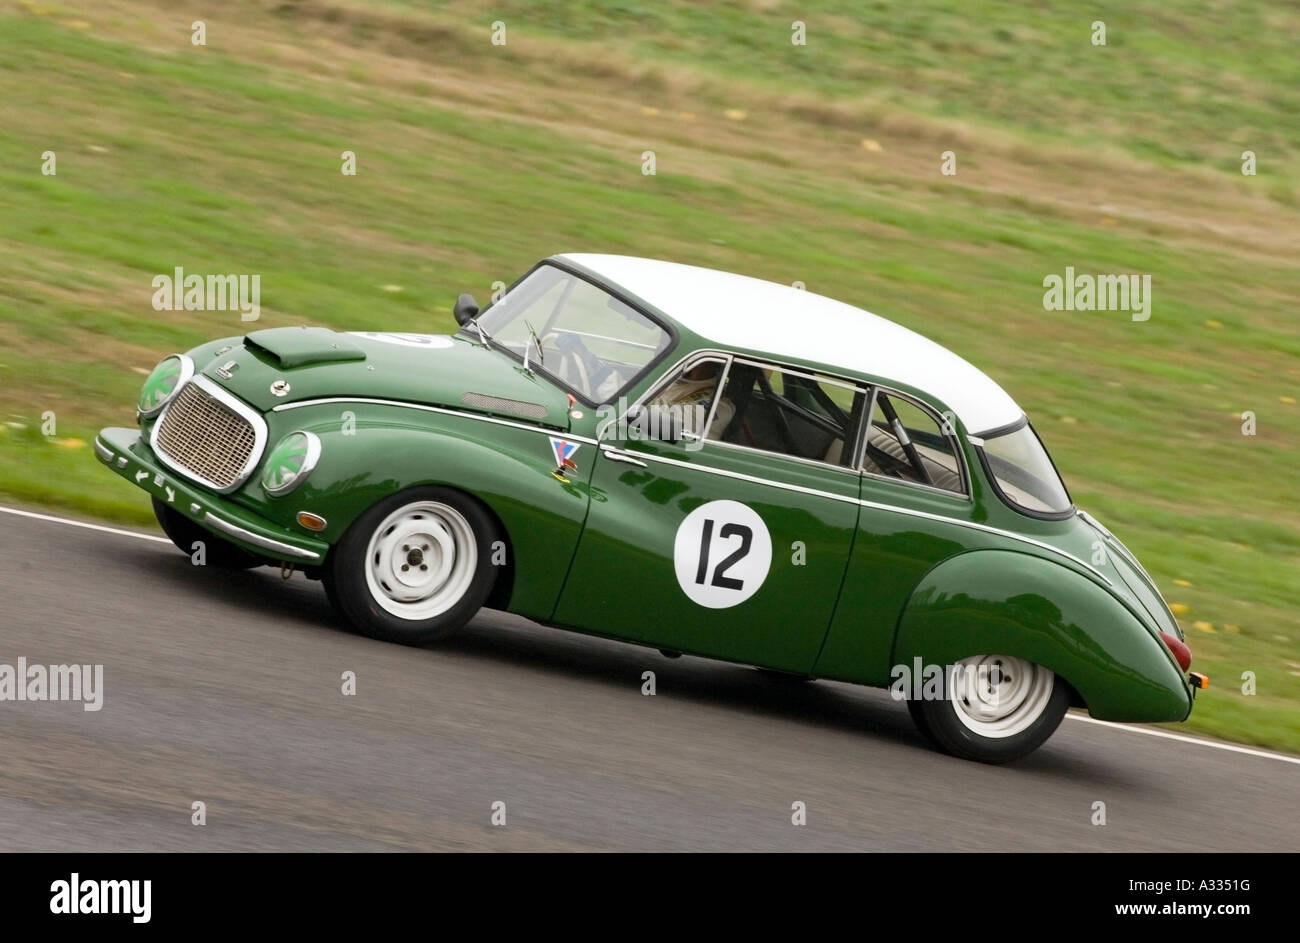 1958 DKW 1000 in the St Marys Trophy race at Goodwood Revival, Sussex, England. Stock Photo